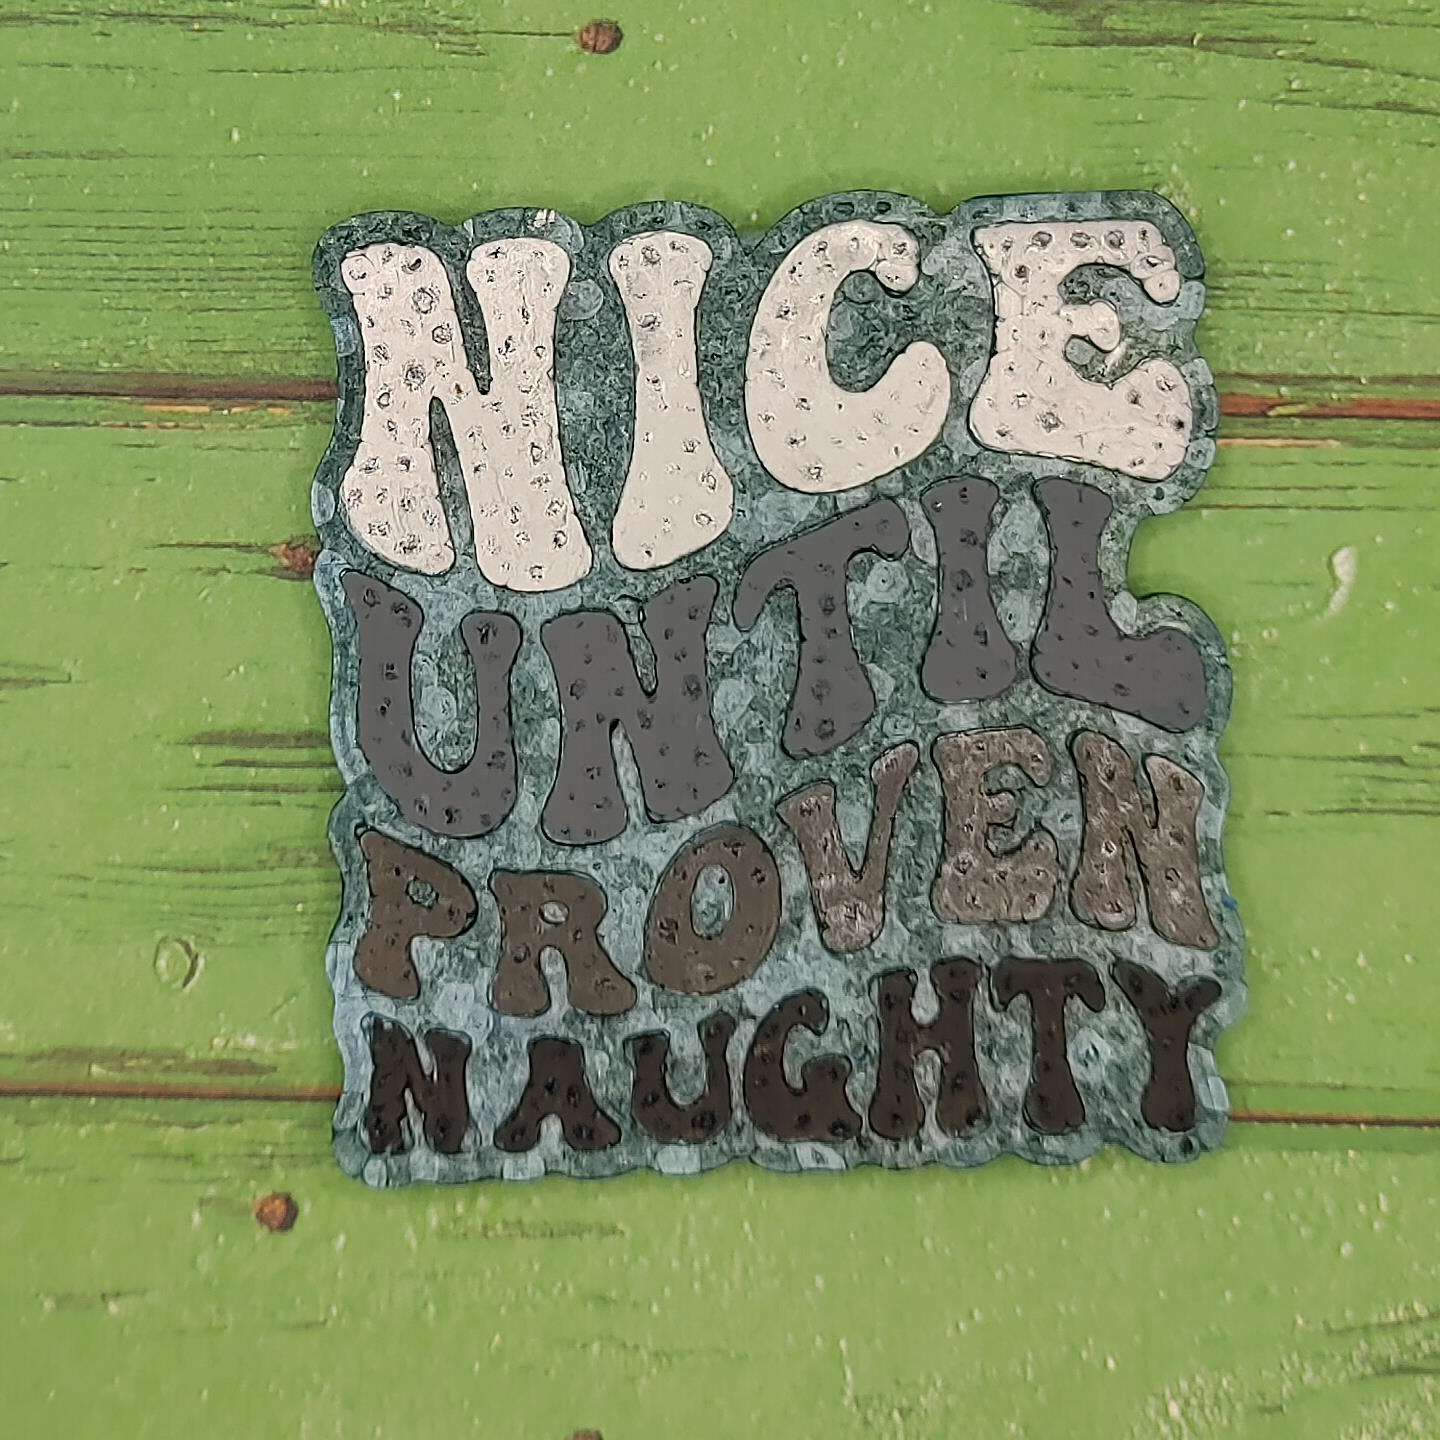 Nice Until Proven Naughty - Silicone Freshie Mold